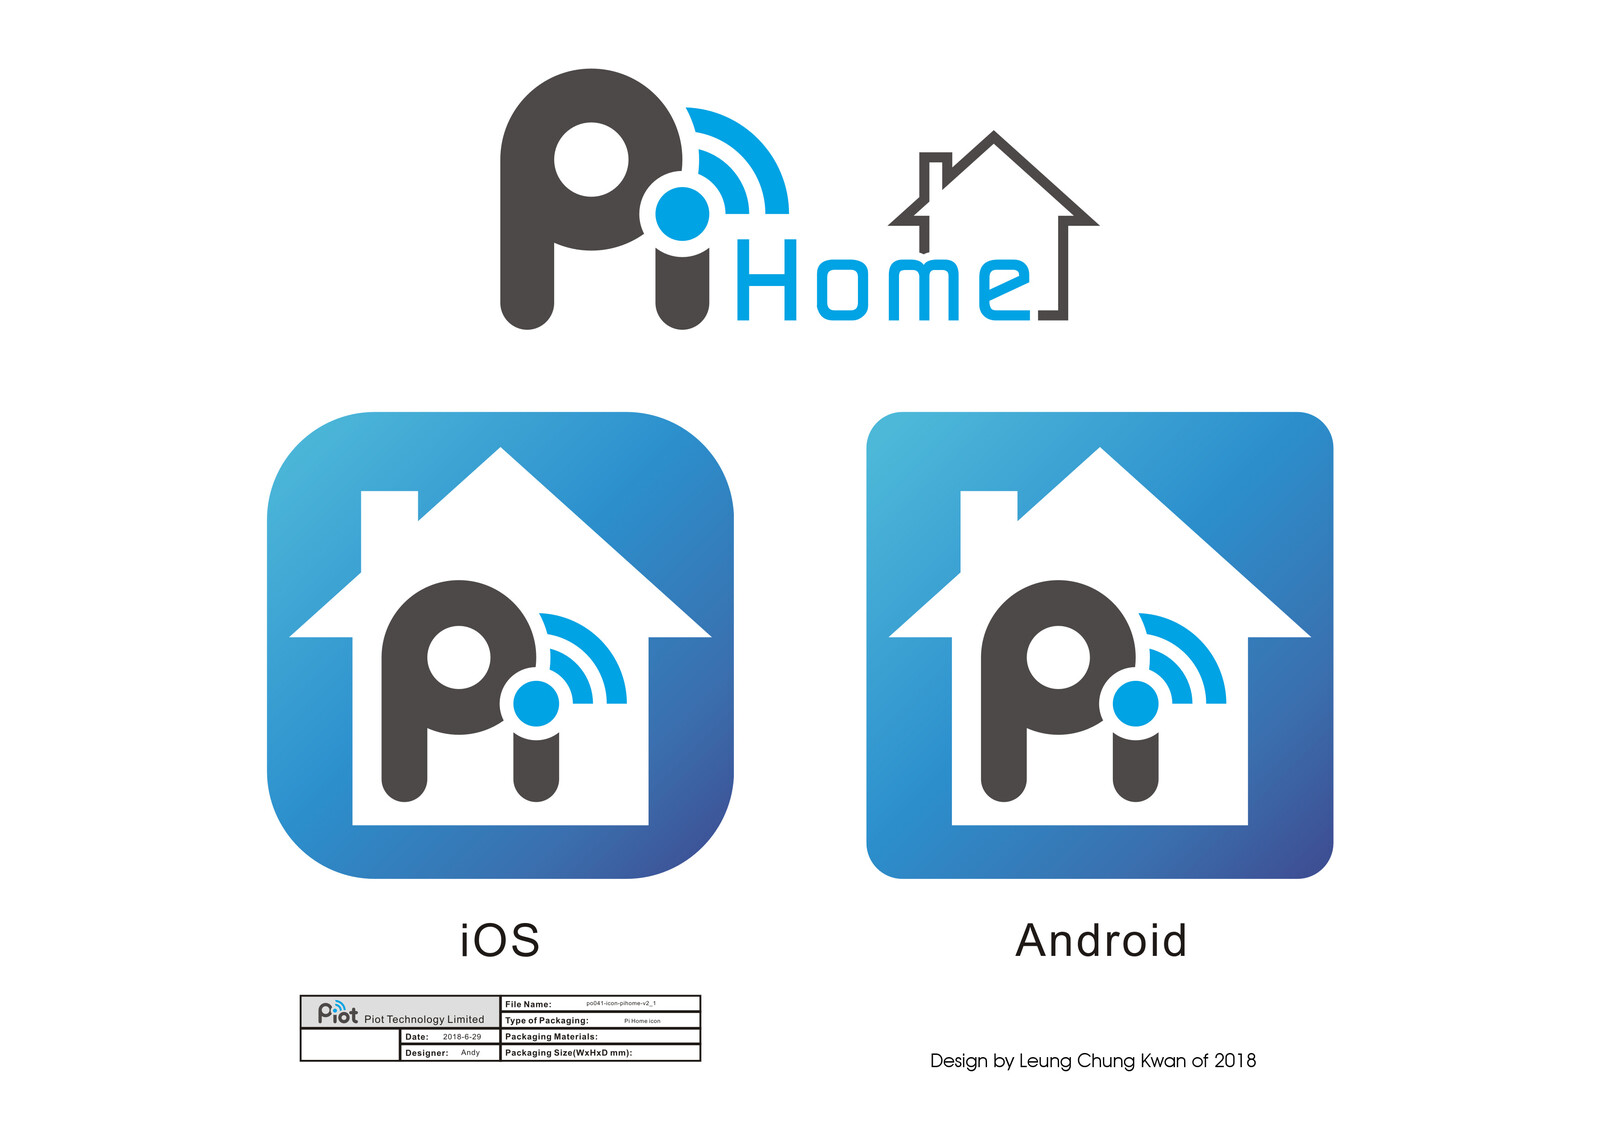 💎 App Icon | Design by Leung Chung Kwan on 2018 💎
App Name︰Pihome | Client︰Piot Technology Limited